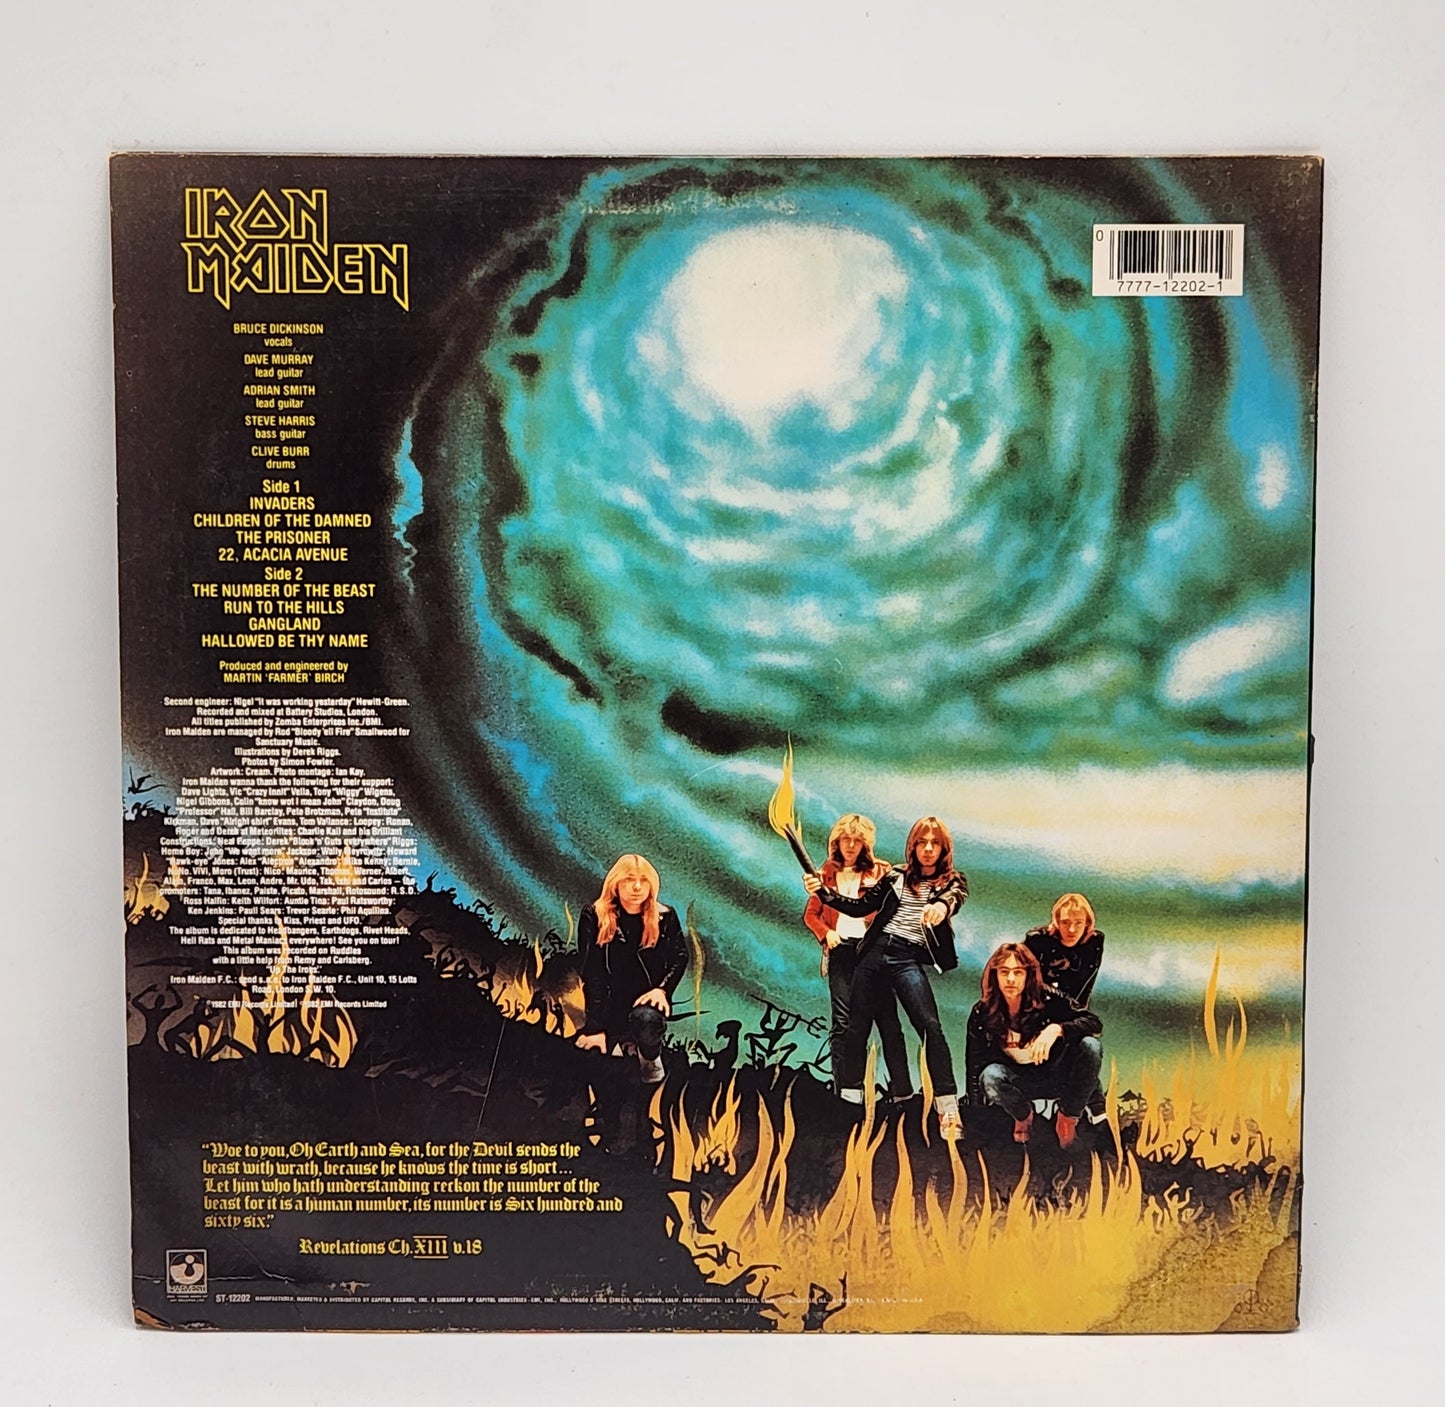 Iron Maiden "The Number Of the Beast" 1982 Heavy Metal Record Album